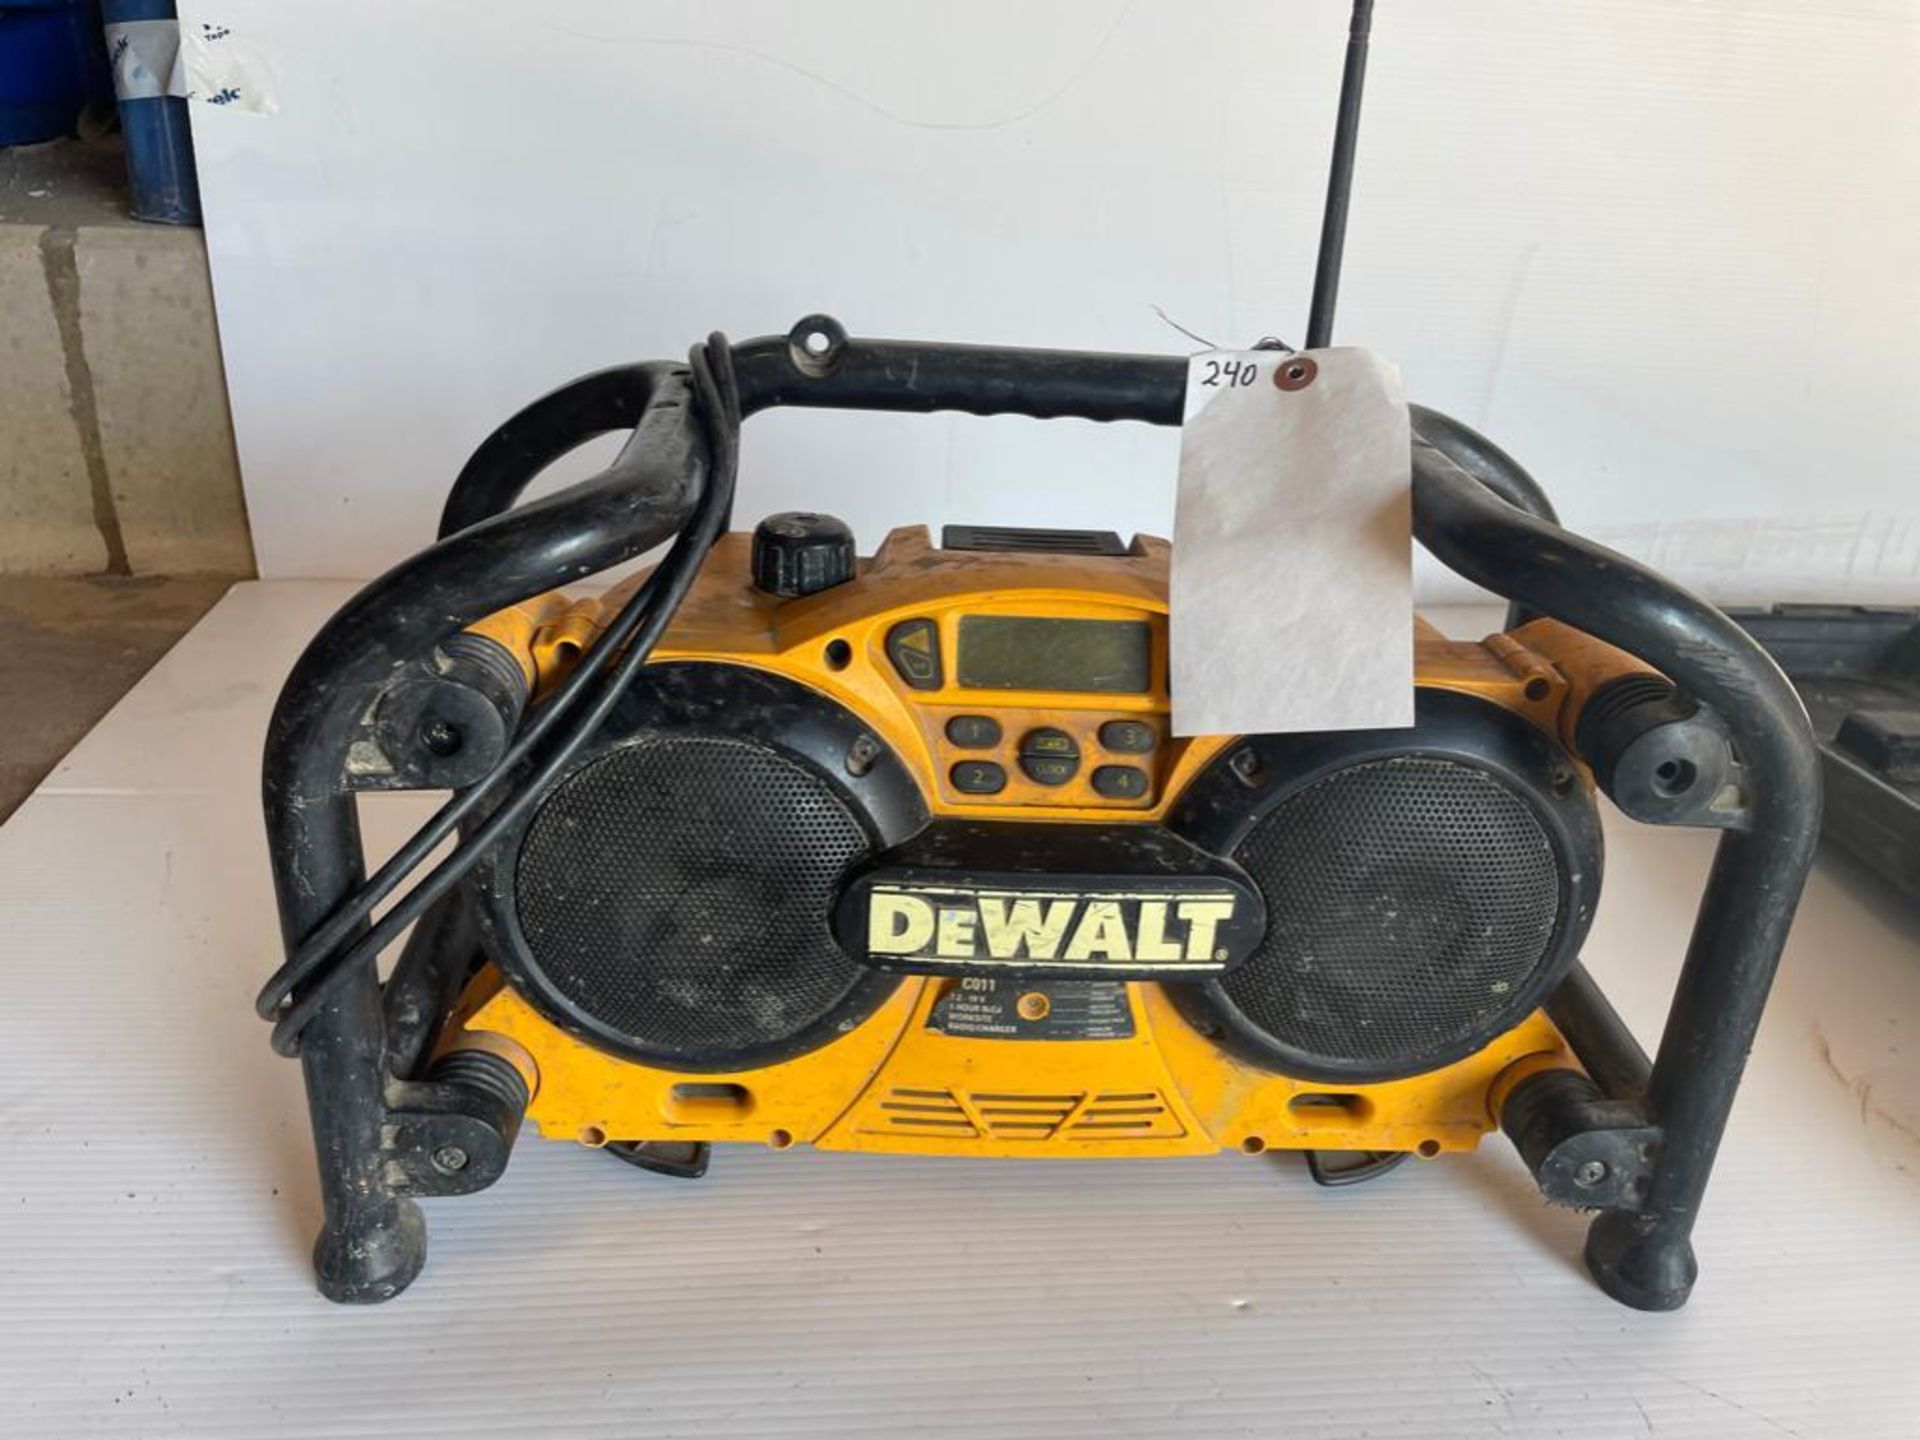 DeWalt DC011 Work Site Radio/Charger. Located in Hazelwood, MO